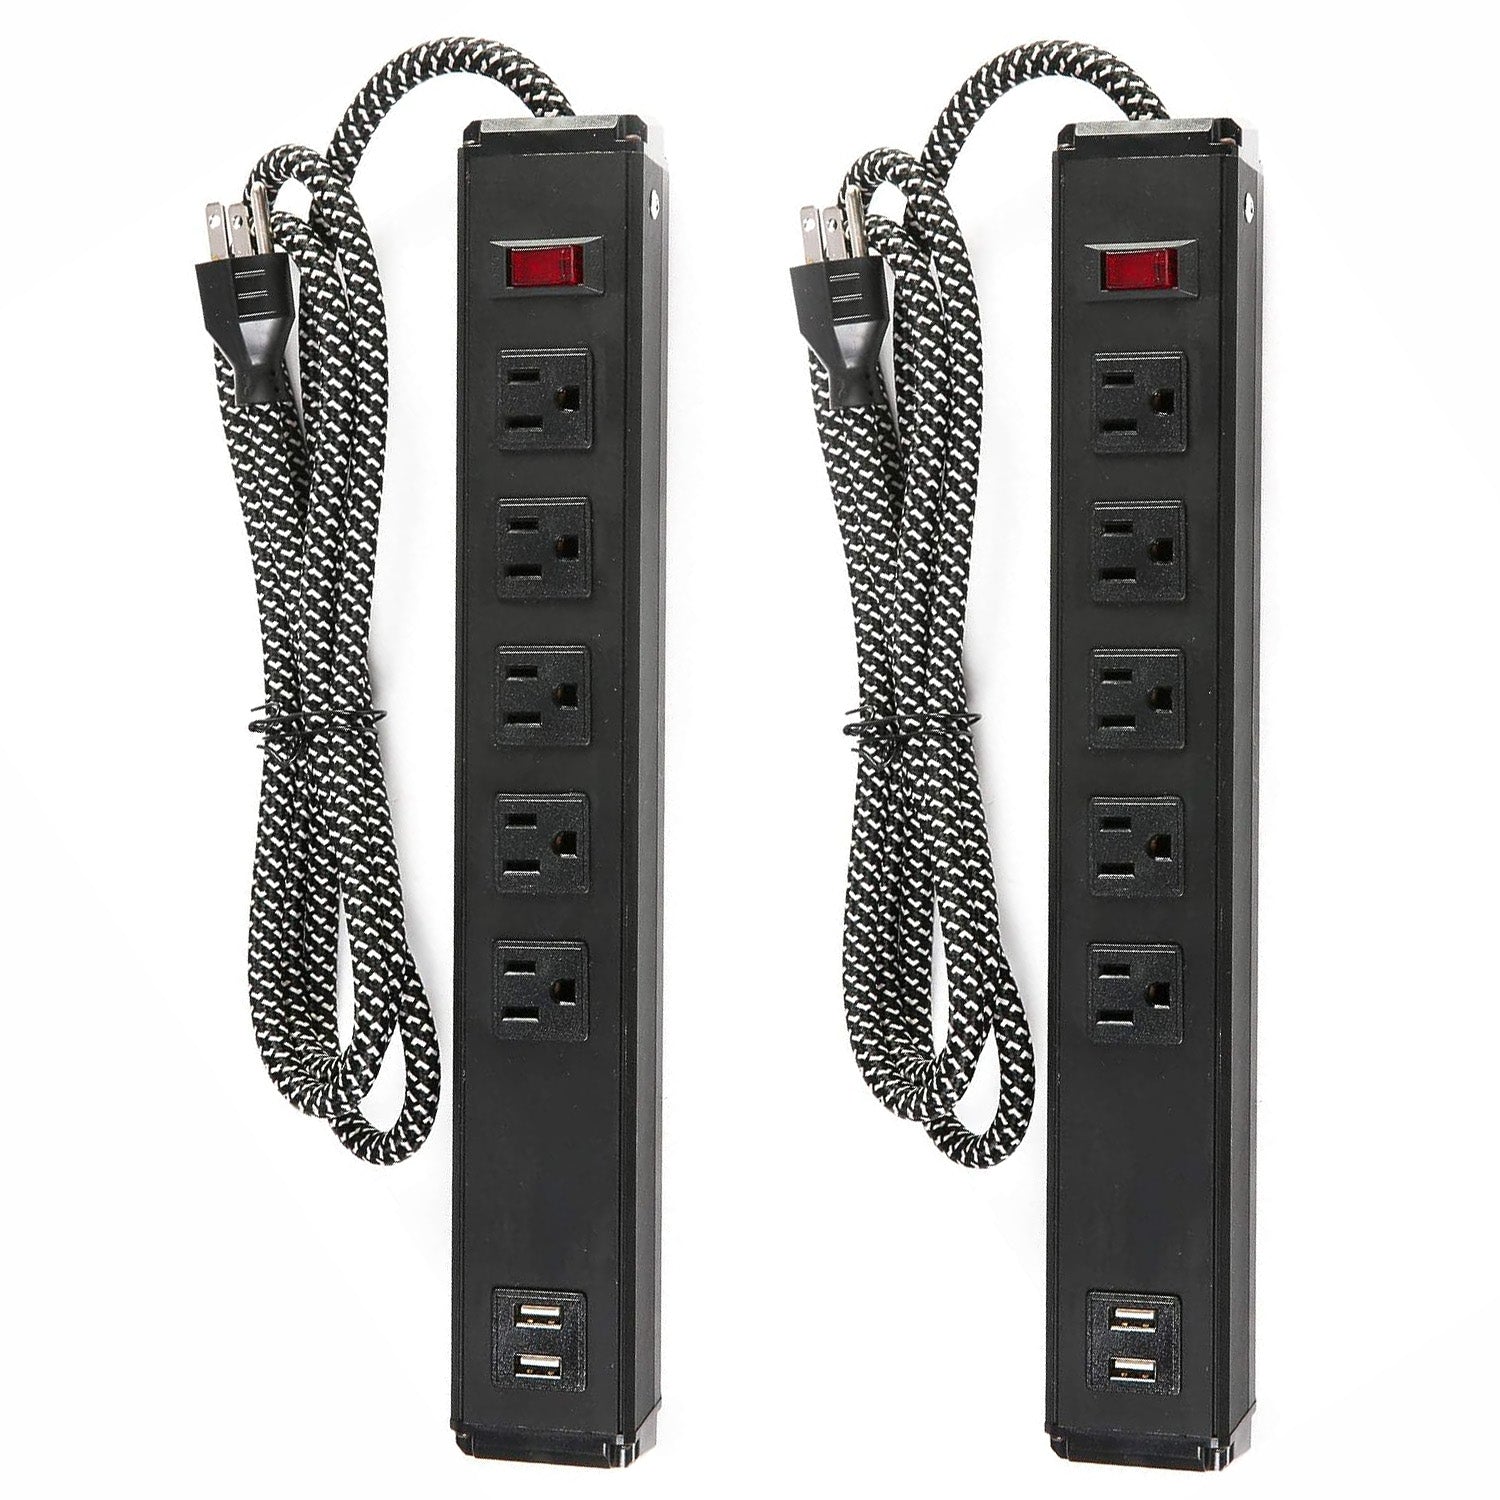 Set of 2 Power Strip 5 Outlets 2 USB Ports with Surge Protector Wall Mount, Black